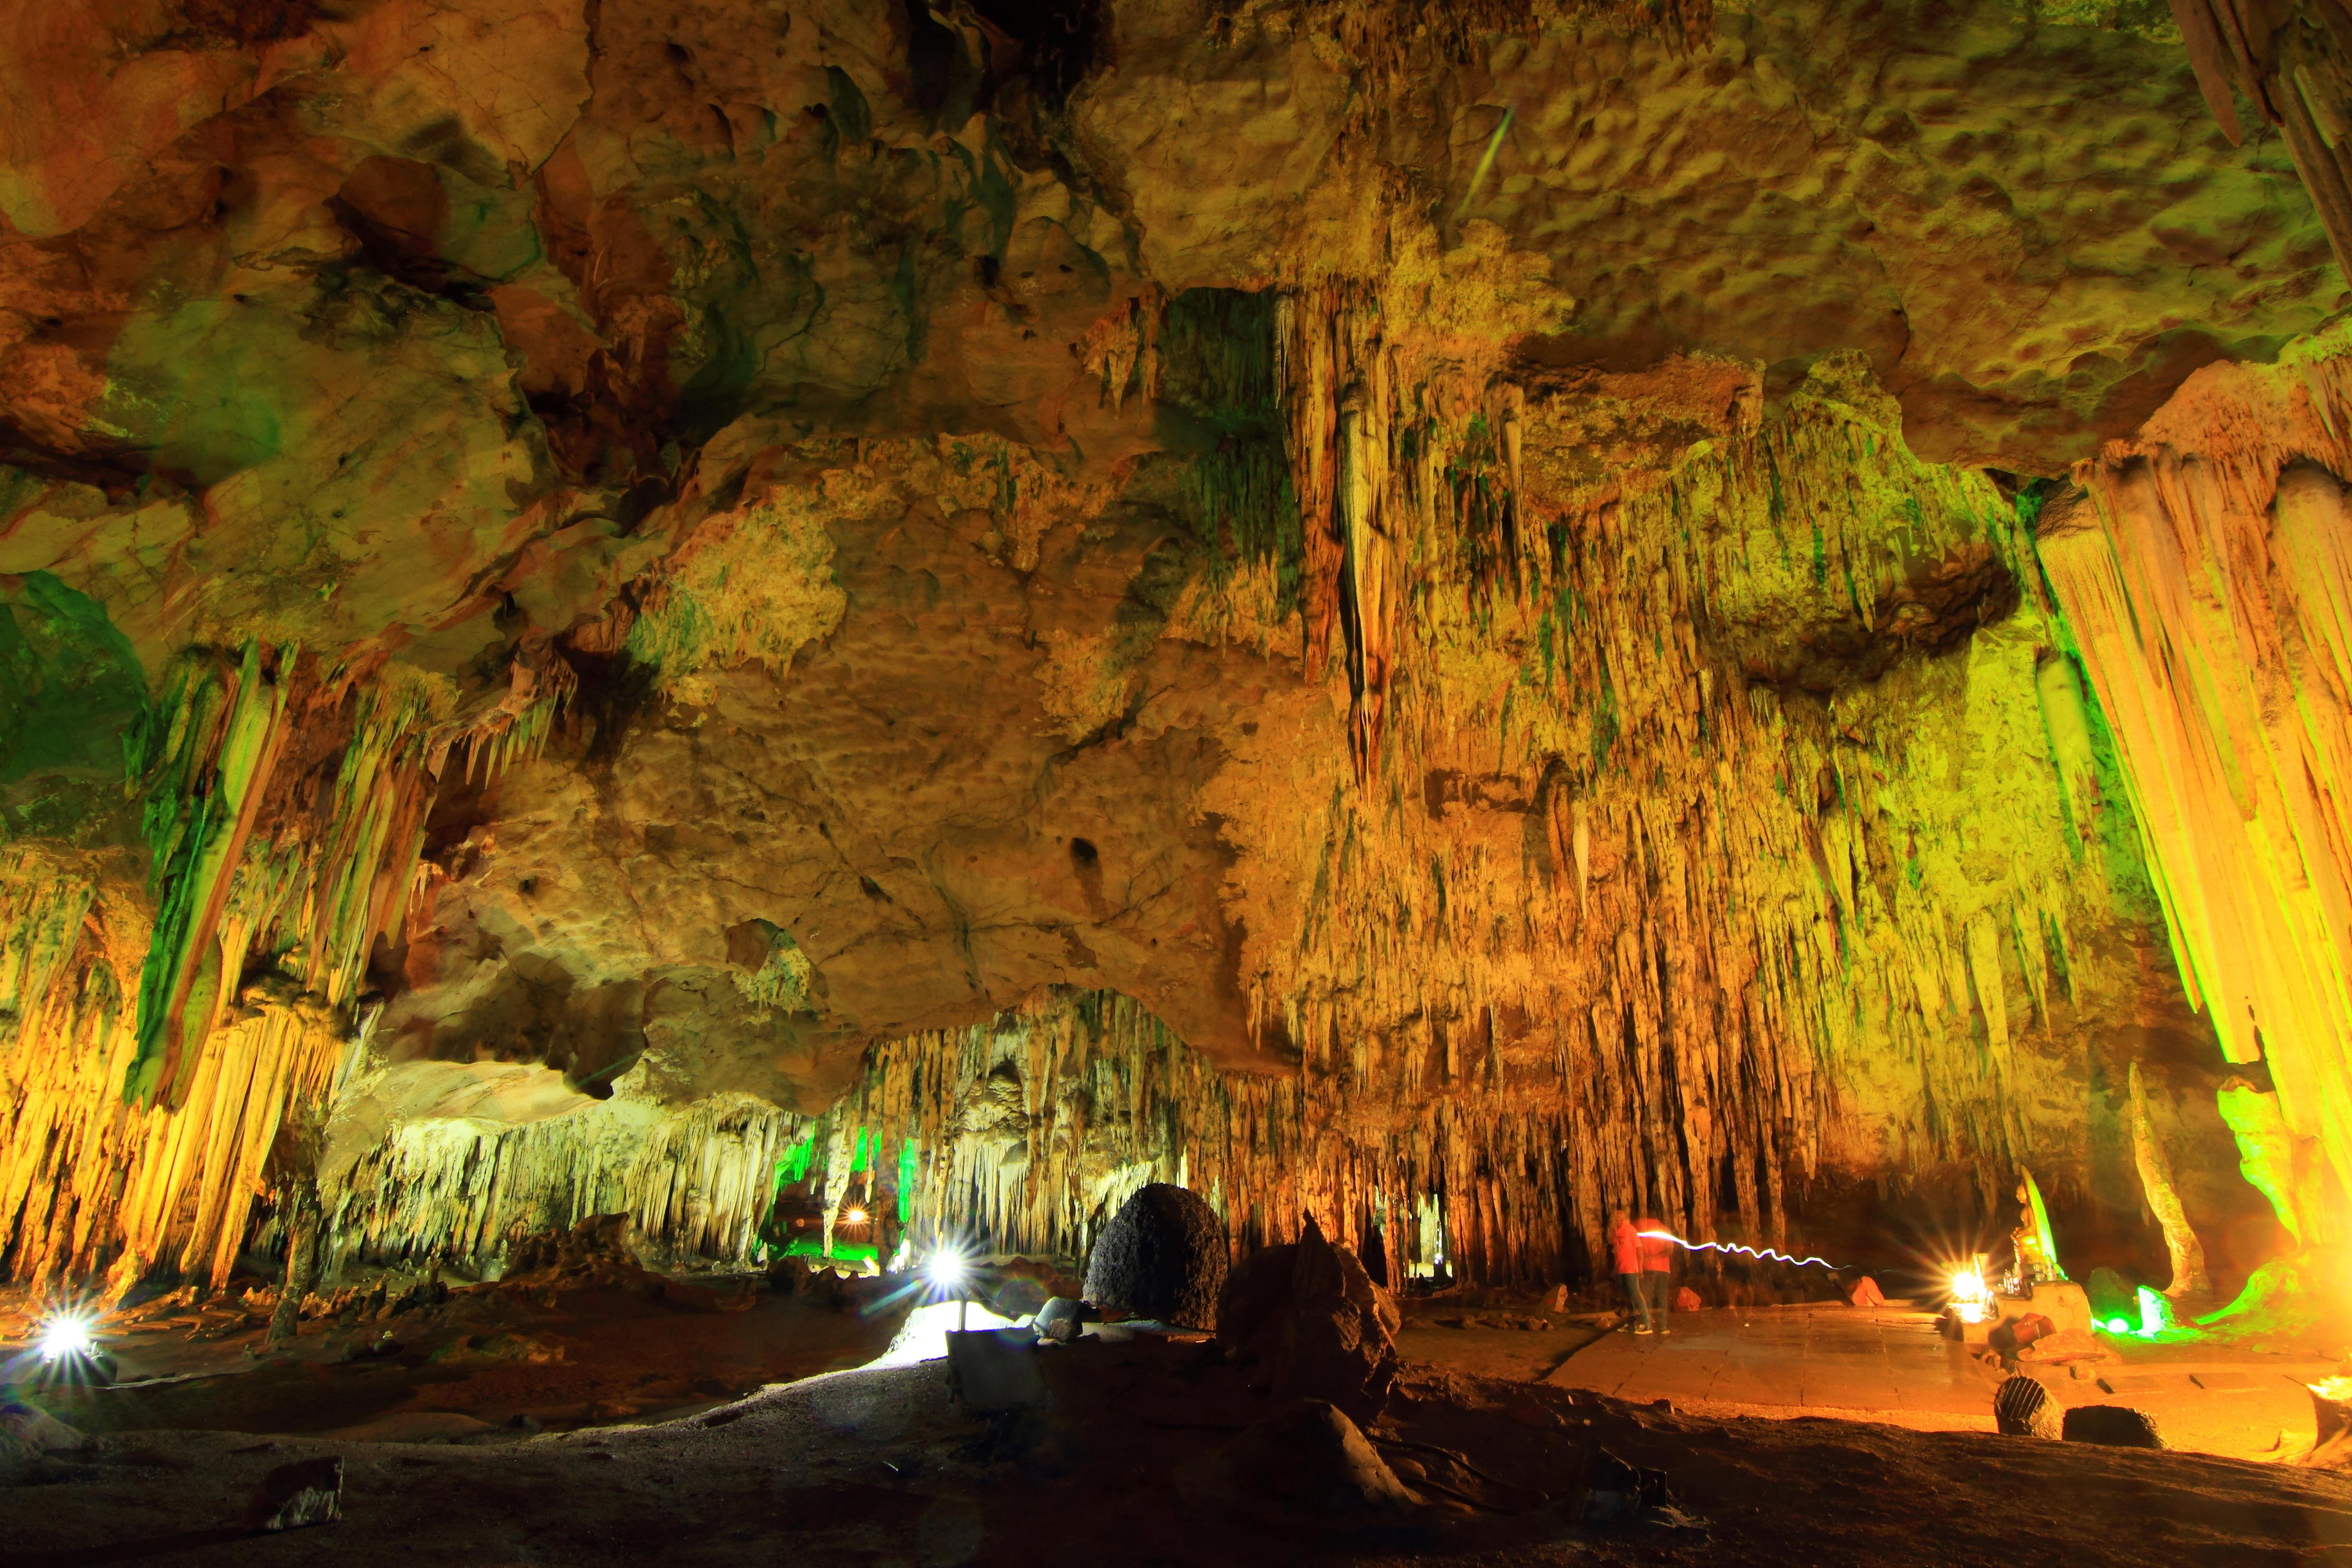 <p>Insider named Mammoth Cave National Park the <a href="https://www.insider.com/beautiful-natural-attractions-in-every-state-2016-11">most beautiful natural wonder in Kentucky</a>.</p>